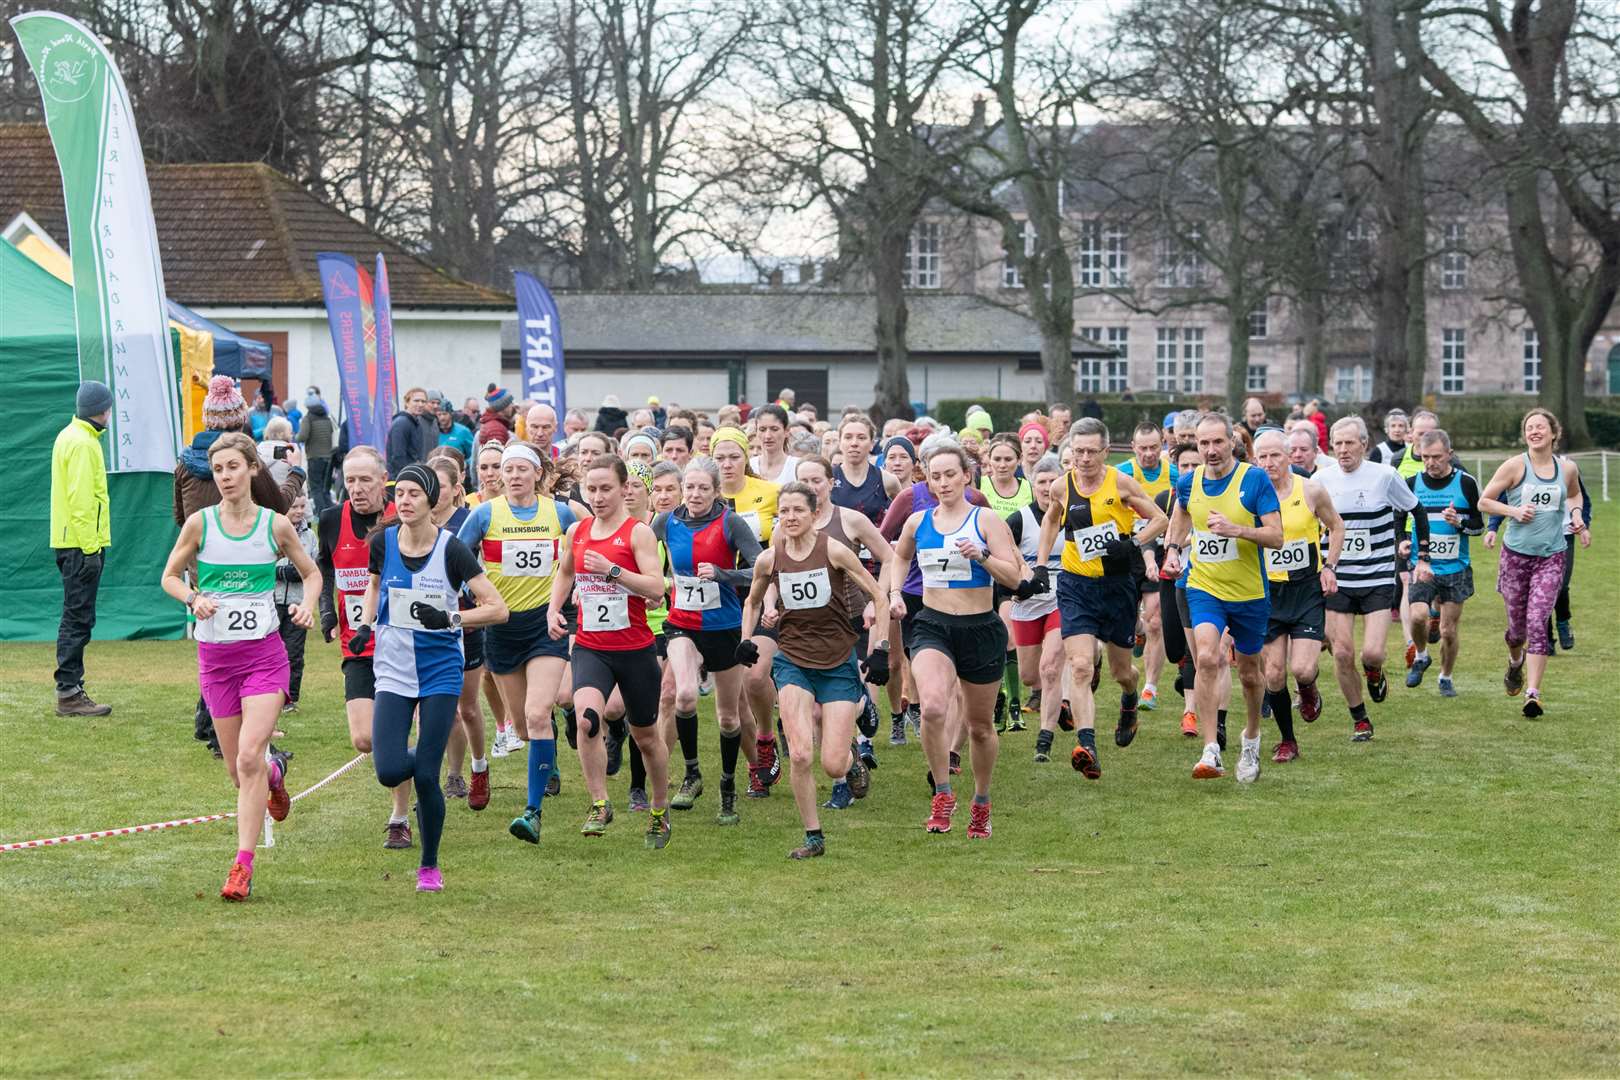 The women's and men's over 65 race gets under way at Grant Park in Forres. Picture: Daniel Forsyth